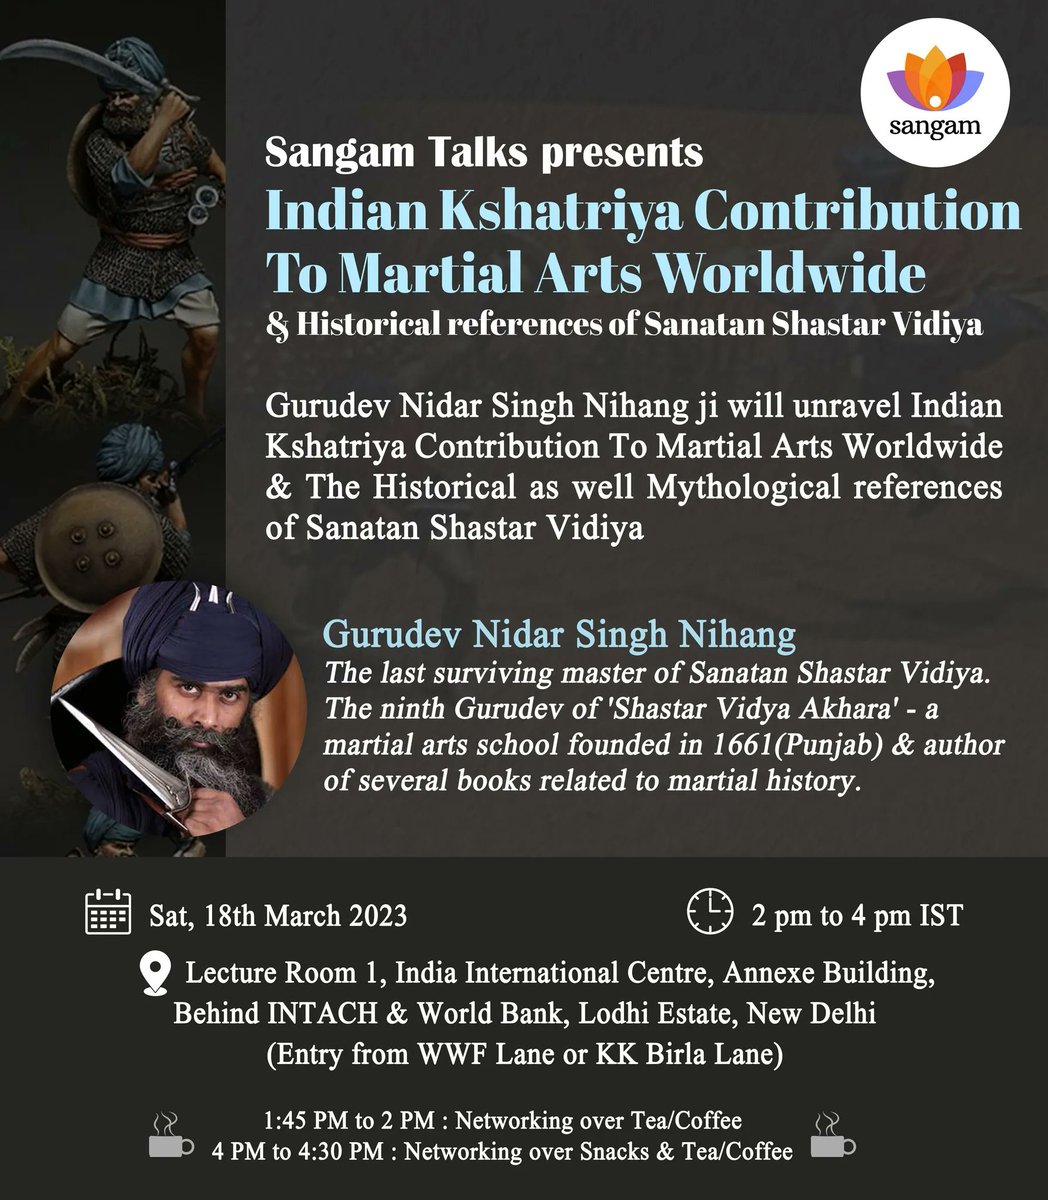 Join us for an exclusive offline event on March 18 at IIC, where Gurudev Nidar Singh Nihang ji will enlighten us on the ancient Indian martial art's historical and mythological references & its worldwide significance in the field of martial arts. #SangamTalks #IndianMartialArts